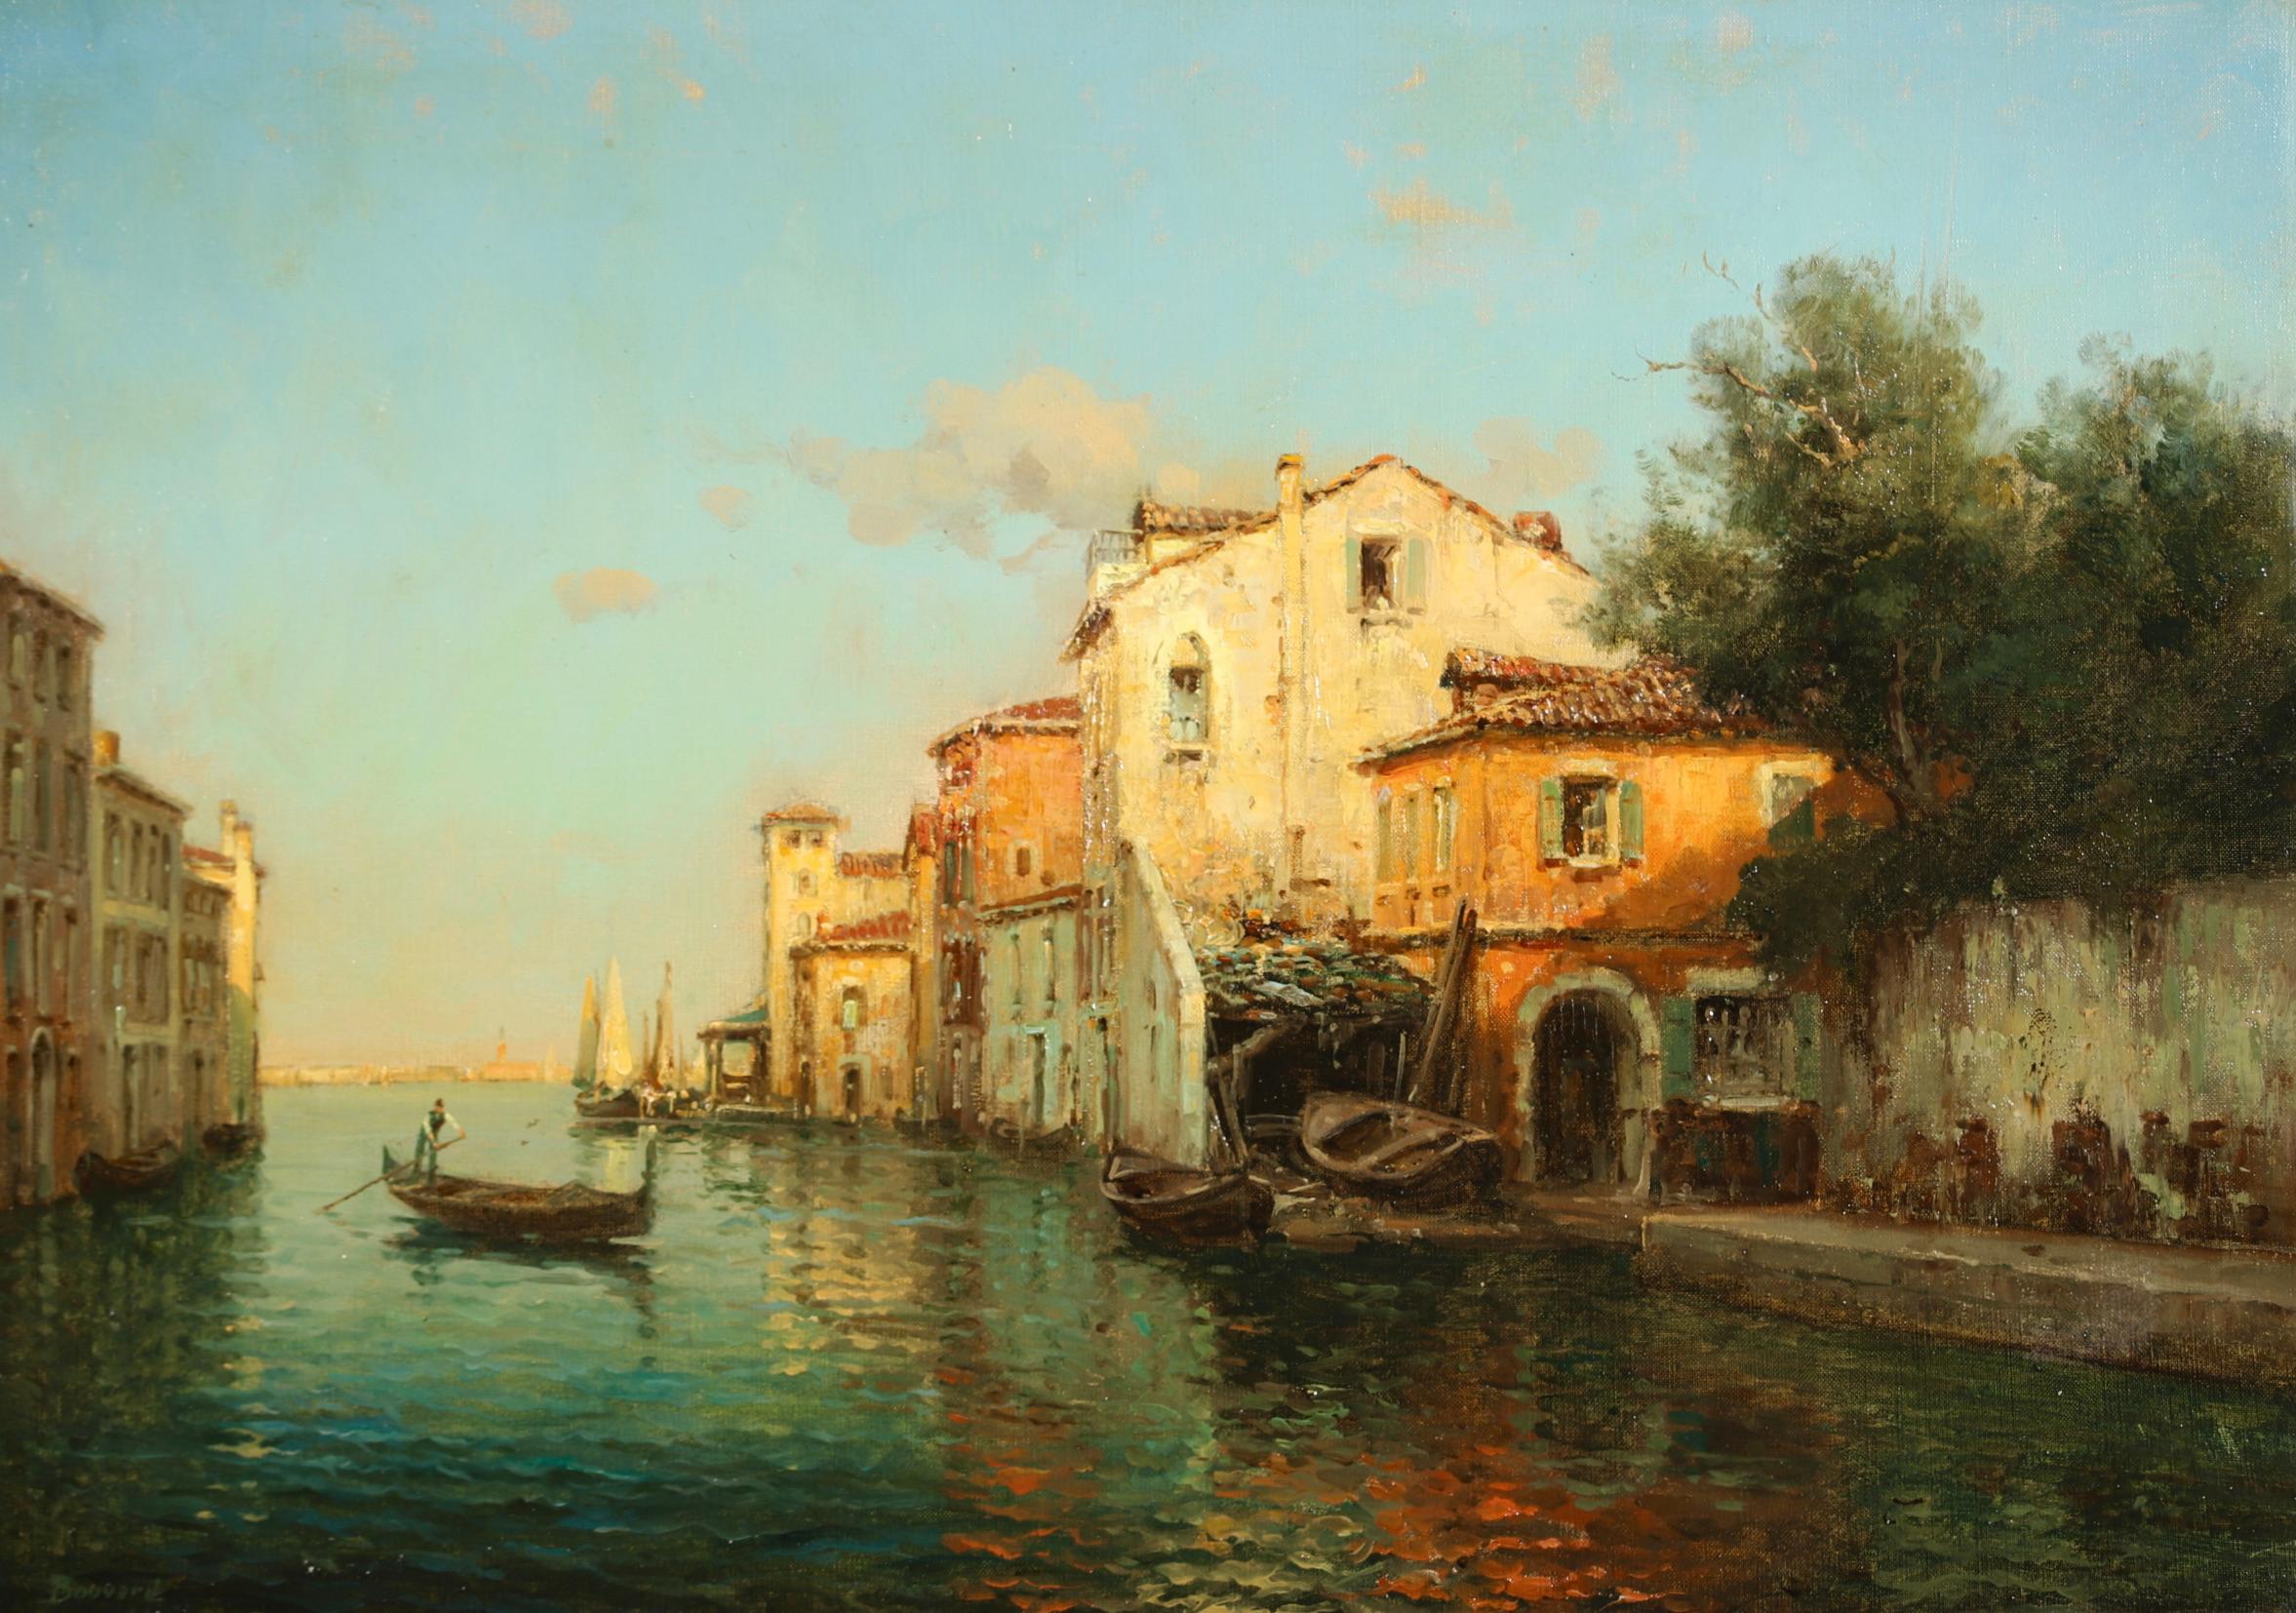 Signed impressionist landscape oil on canvas circa 1920 by French painter Antoine Bouvard Snr. The work depicts a figure rowing on a gondola beside buildings lining the canal at the port of Venice. The last light of the setting sun is illuminating